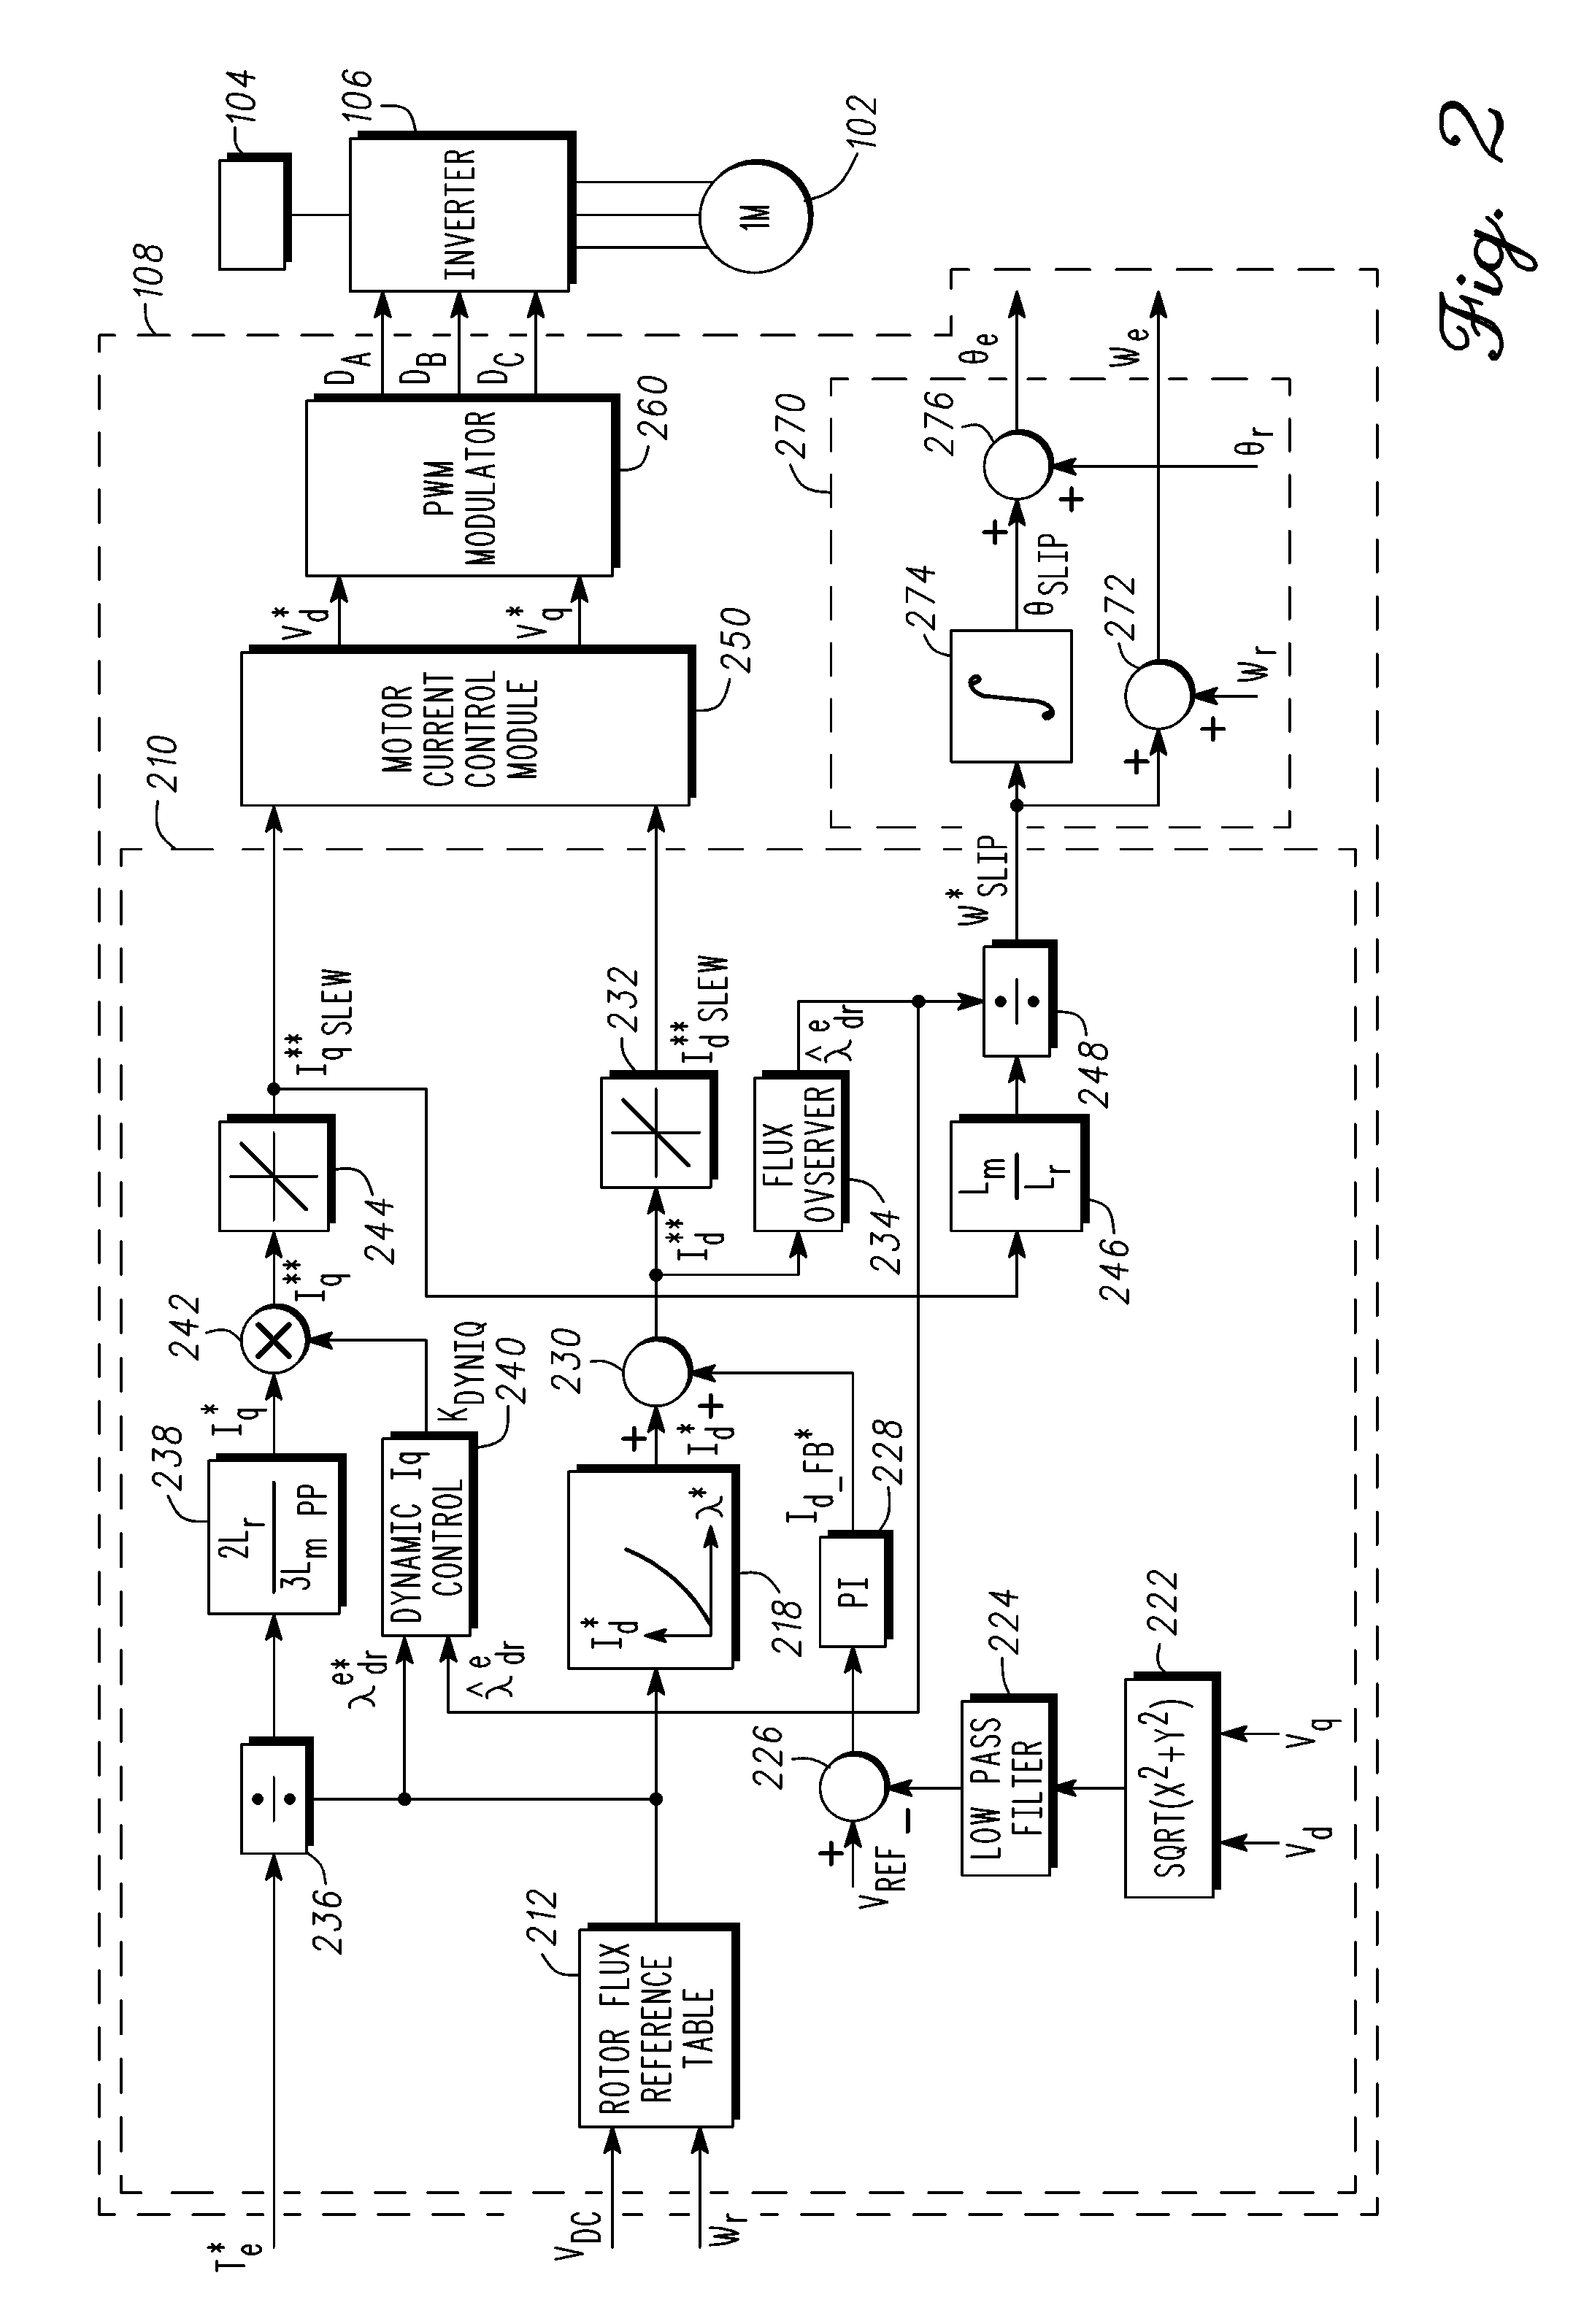 Induction motor control systems and methods